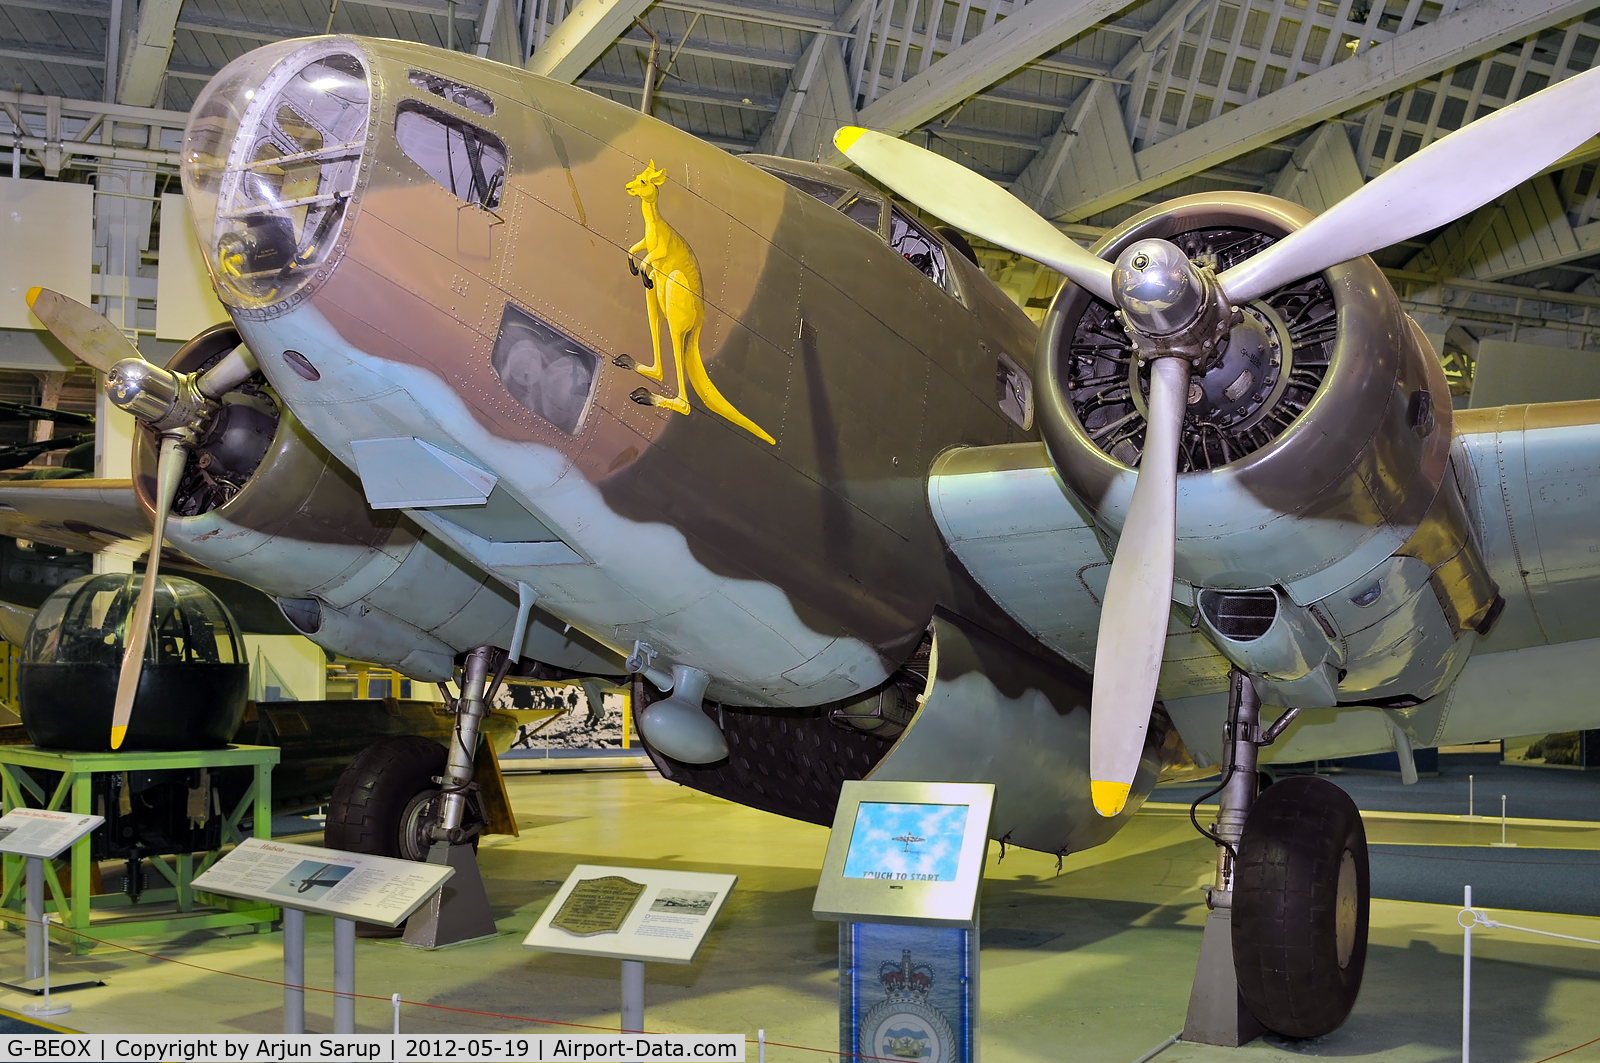 G-BEOX, Lockheed Hudson IV C/N 6464, On display at RAF Museum Hendon.  Intended for the RAF as FH174, this aircraft was diverted to No. 13 Sqn.  RAAF in 1942.  On 3 Feb. 1943 it shot down a F1M2 floatplane.  It then joined No. 2 Sqn. RAAF in April 1943 and shot down a Ki-21 in May.